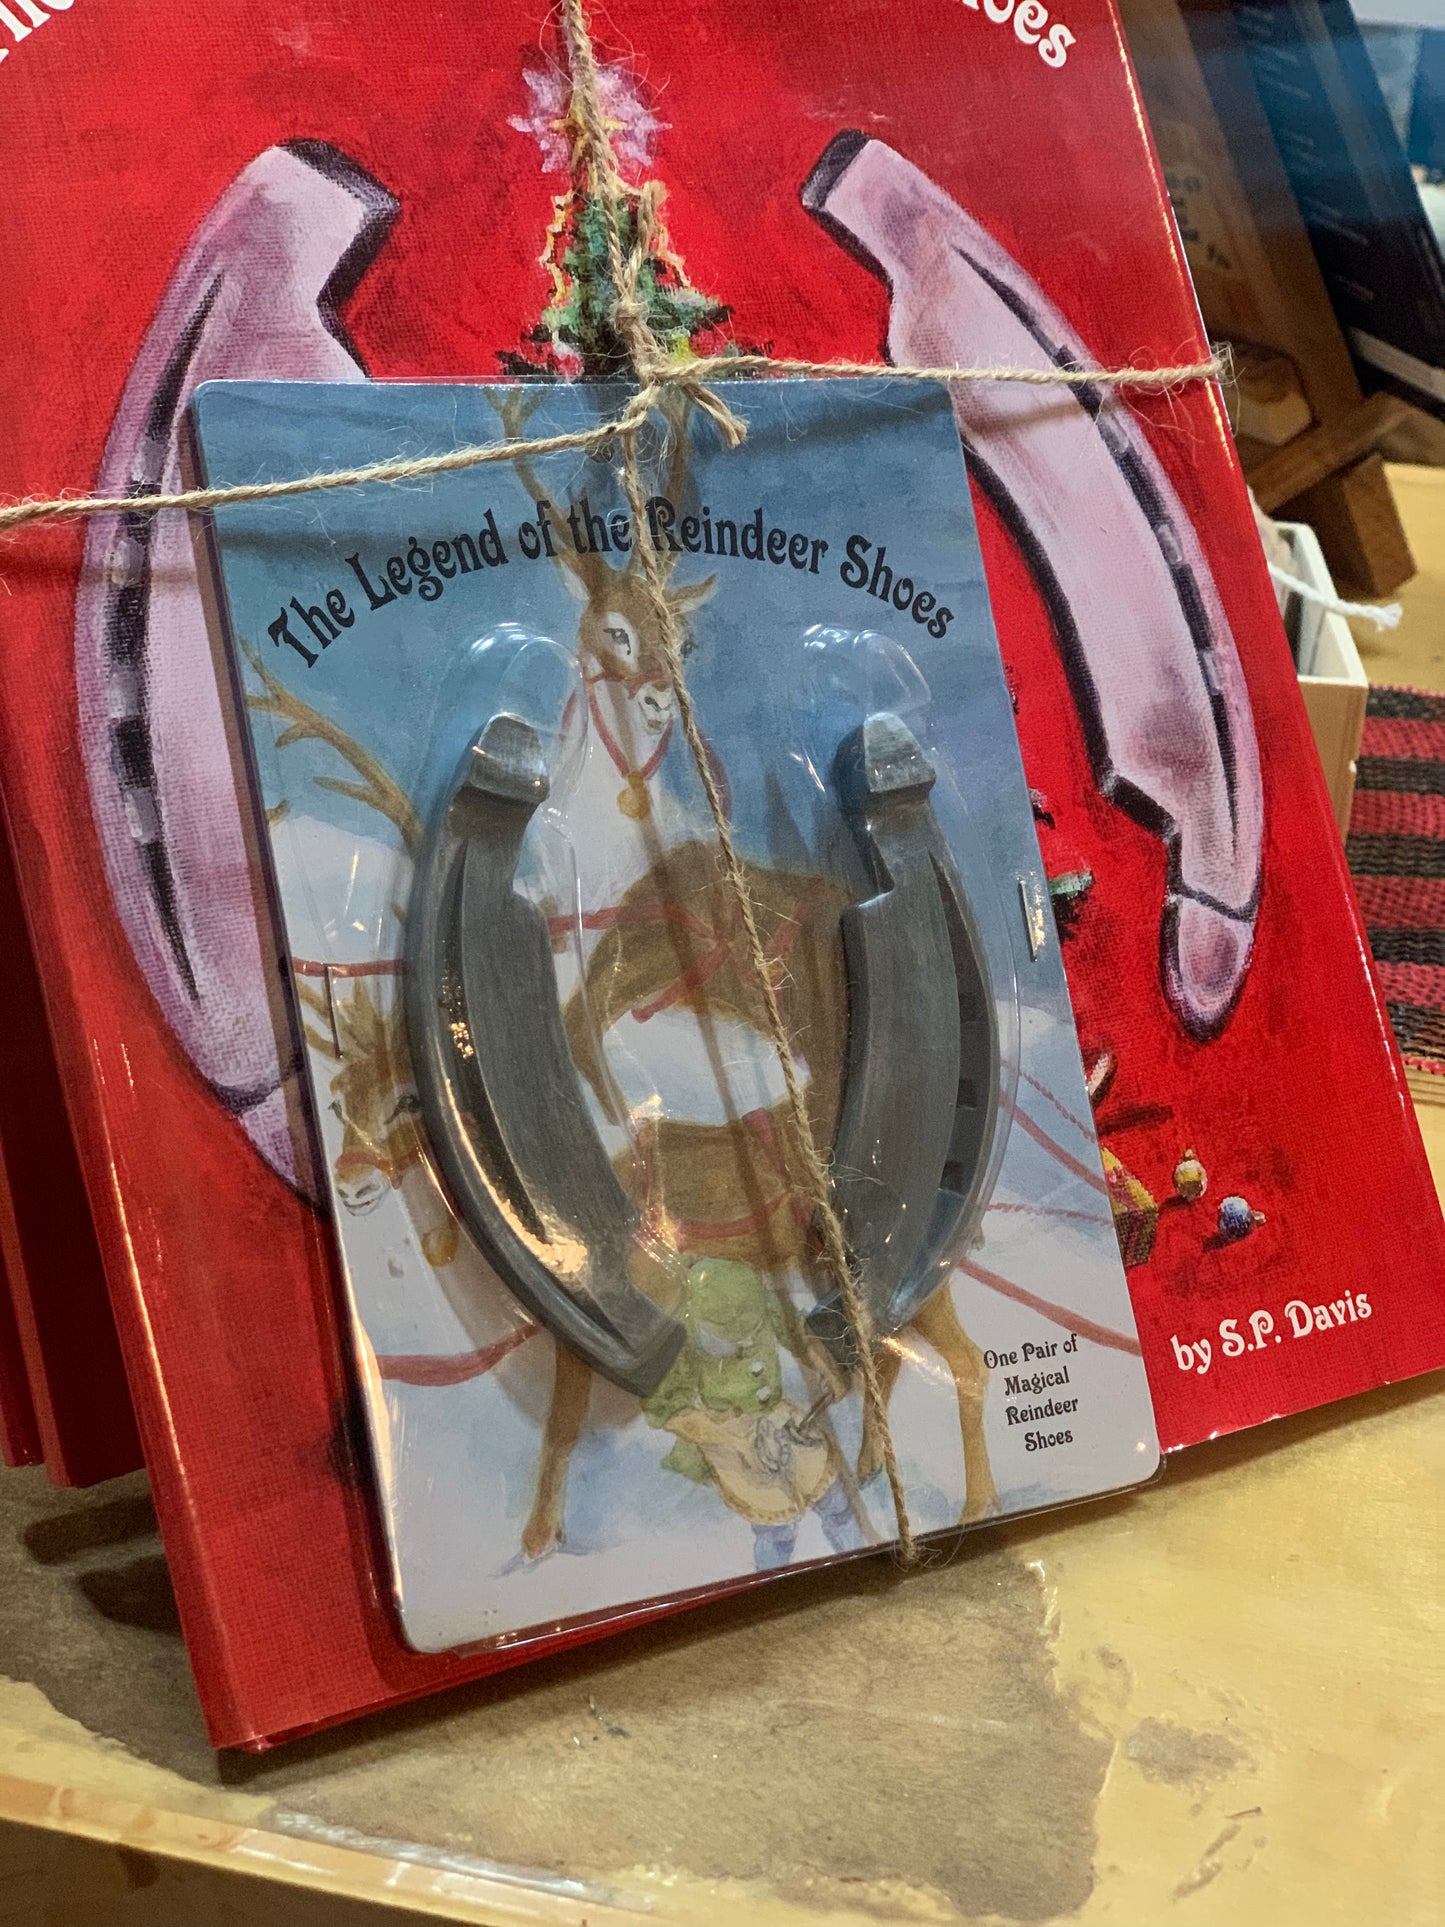 The Legend of the Reindeer Shoes Book by S.P. Davis